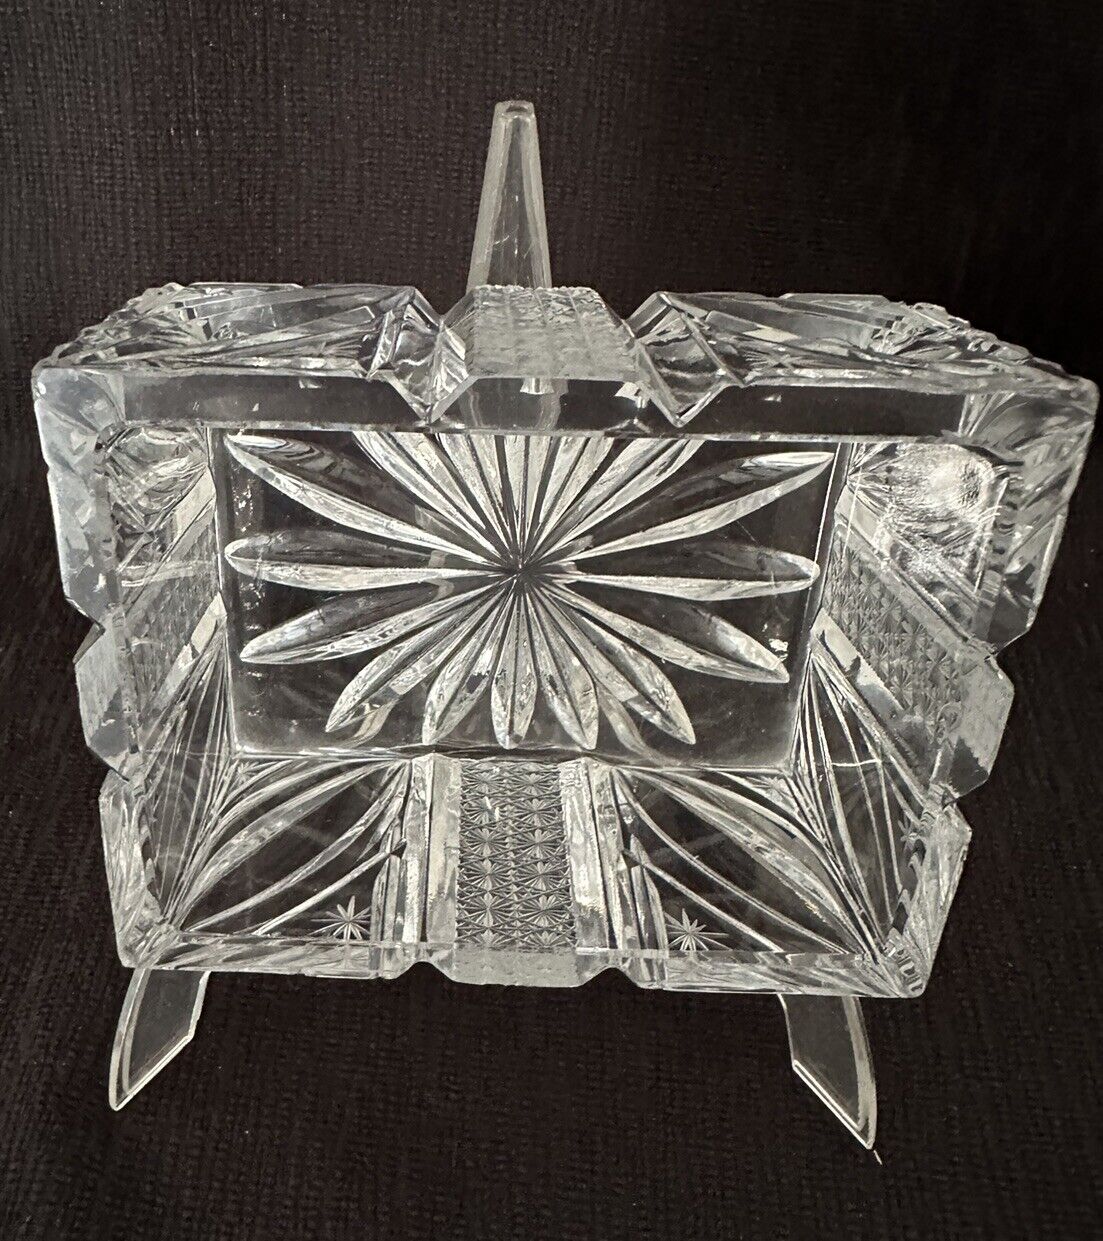 Cut Crystal Square Dish, Intricate Cuts Mints/Candy/Nuts/Jewelry 1970’s Brazil